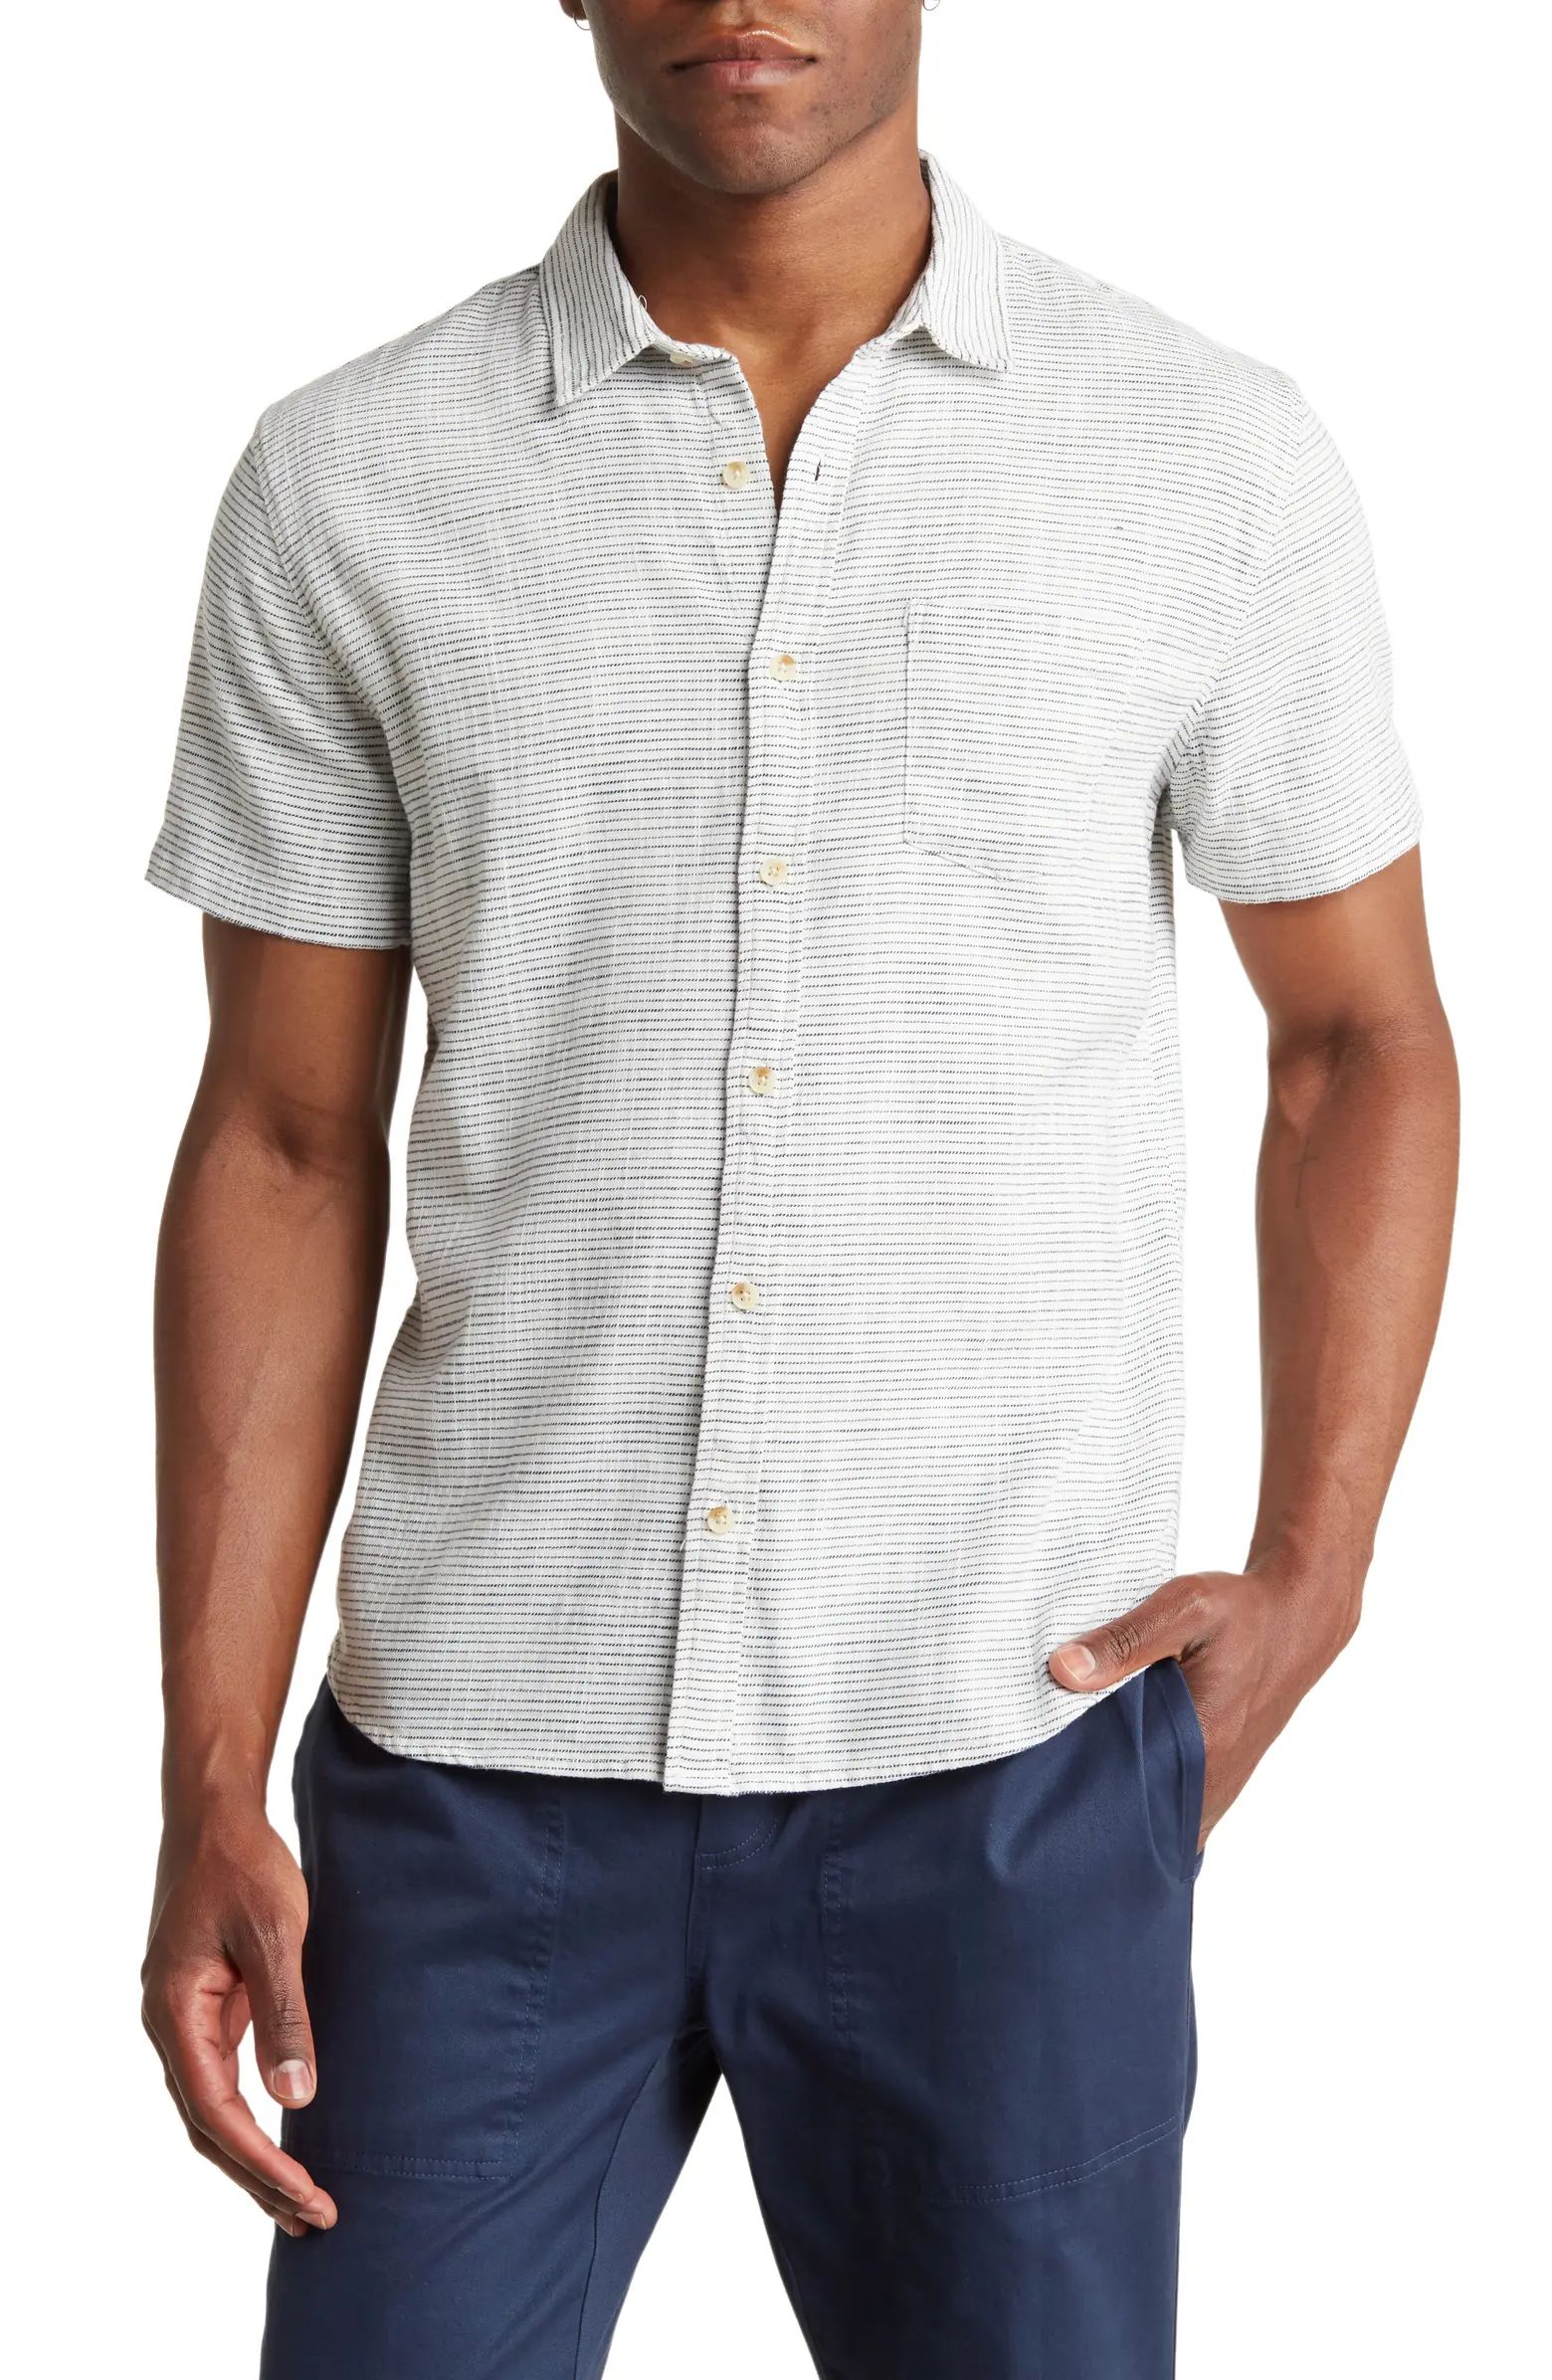 Marine Layer Stretch Selvage Short Sleeve Button-Up Shirt | Nordstrom | Nordstrom